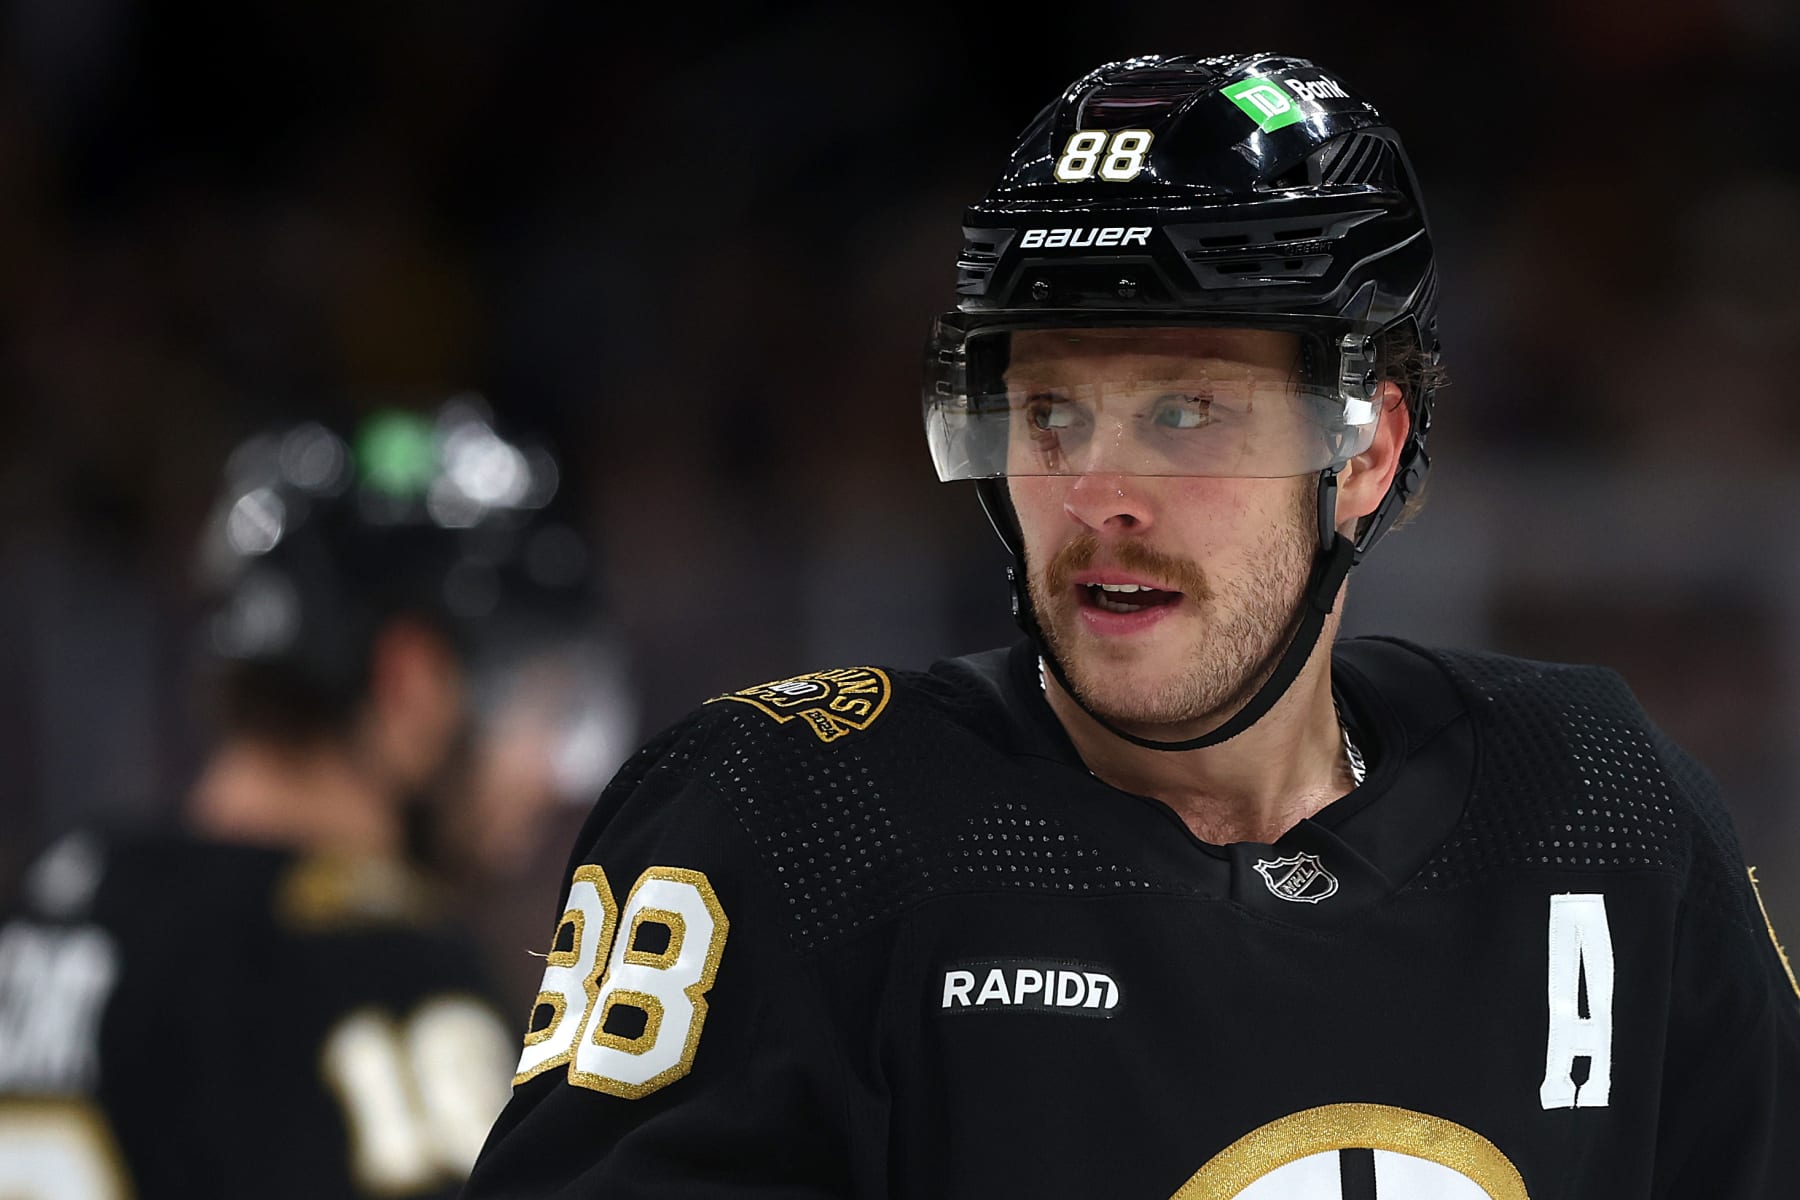 The Ten Best NHL Players in Hockey Today (2023) - NHL Rumors